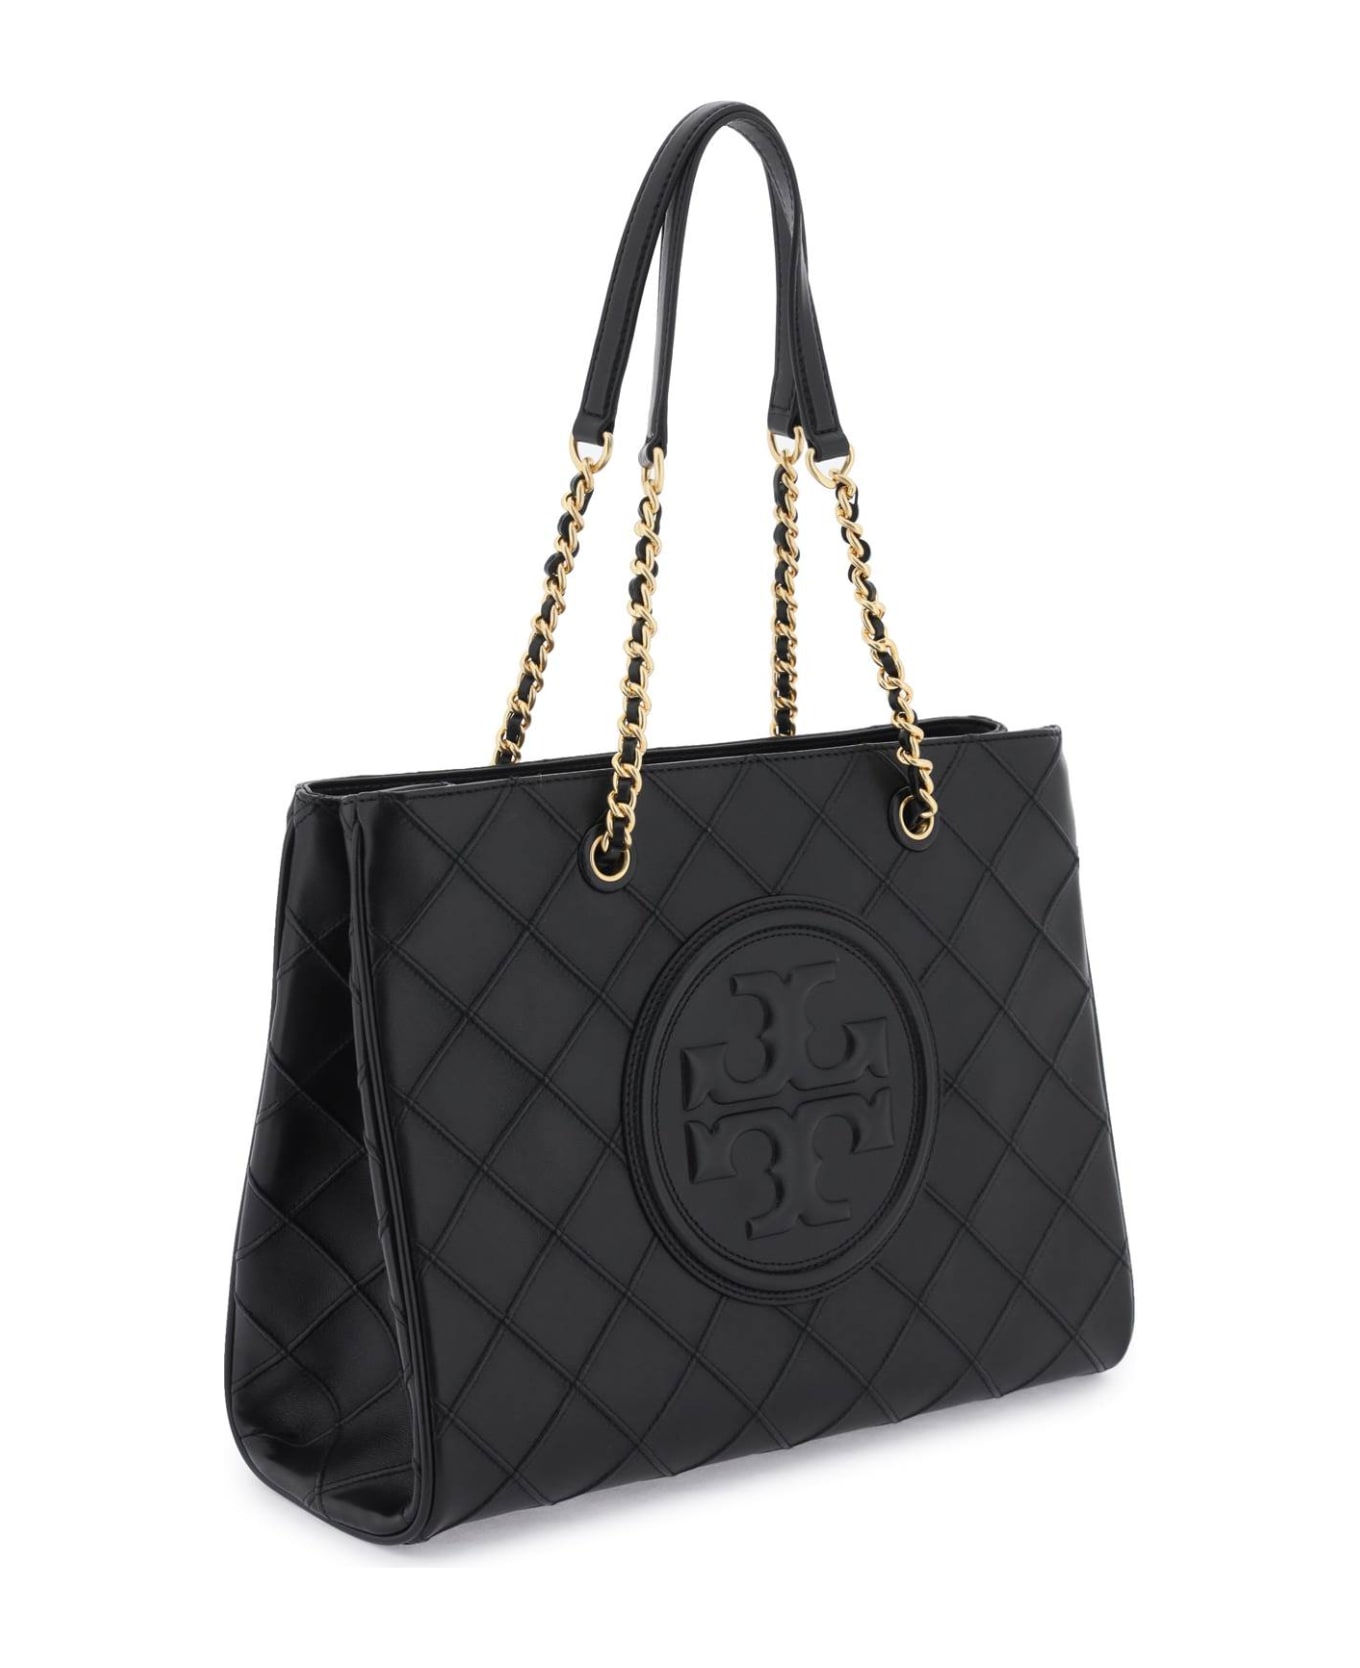 Tory Burch 'fleming Soft' Quilted Black Leather Bag - Black